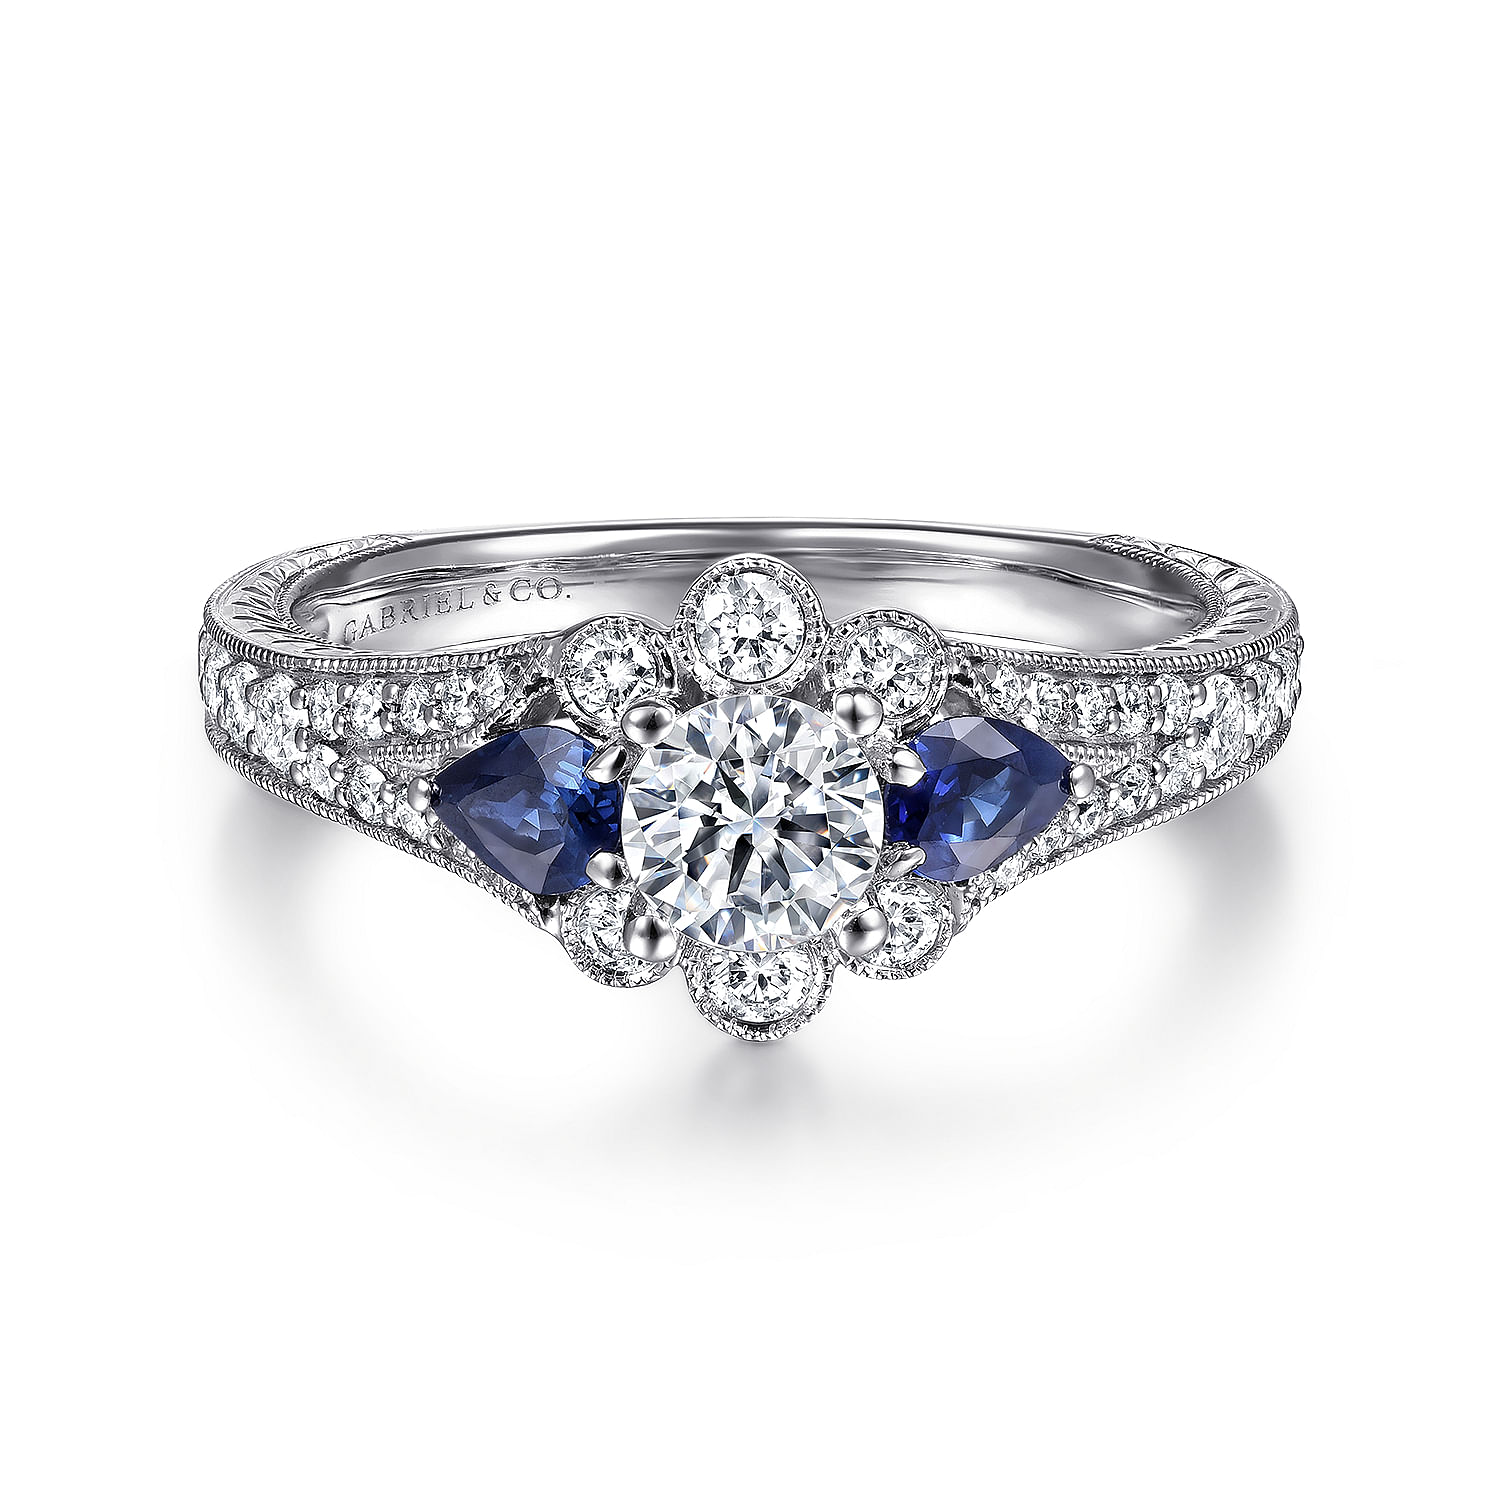 Linden - Vintage Inspired 14K White Gold Round Halo Sapphire and Diamond Engagement Ring